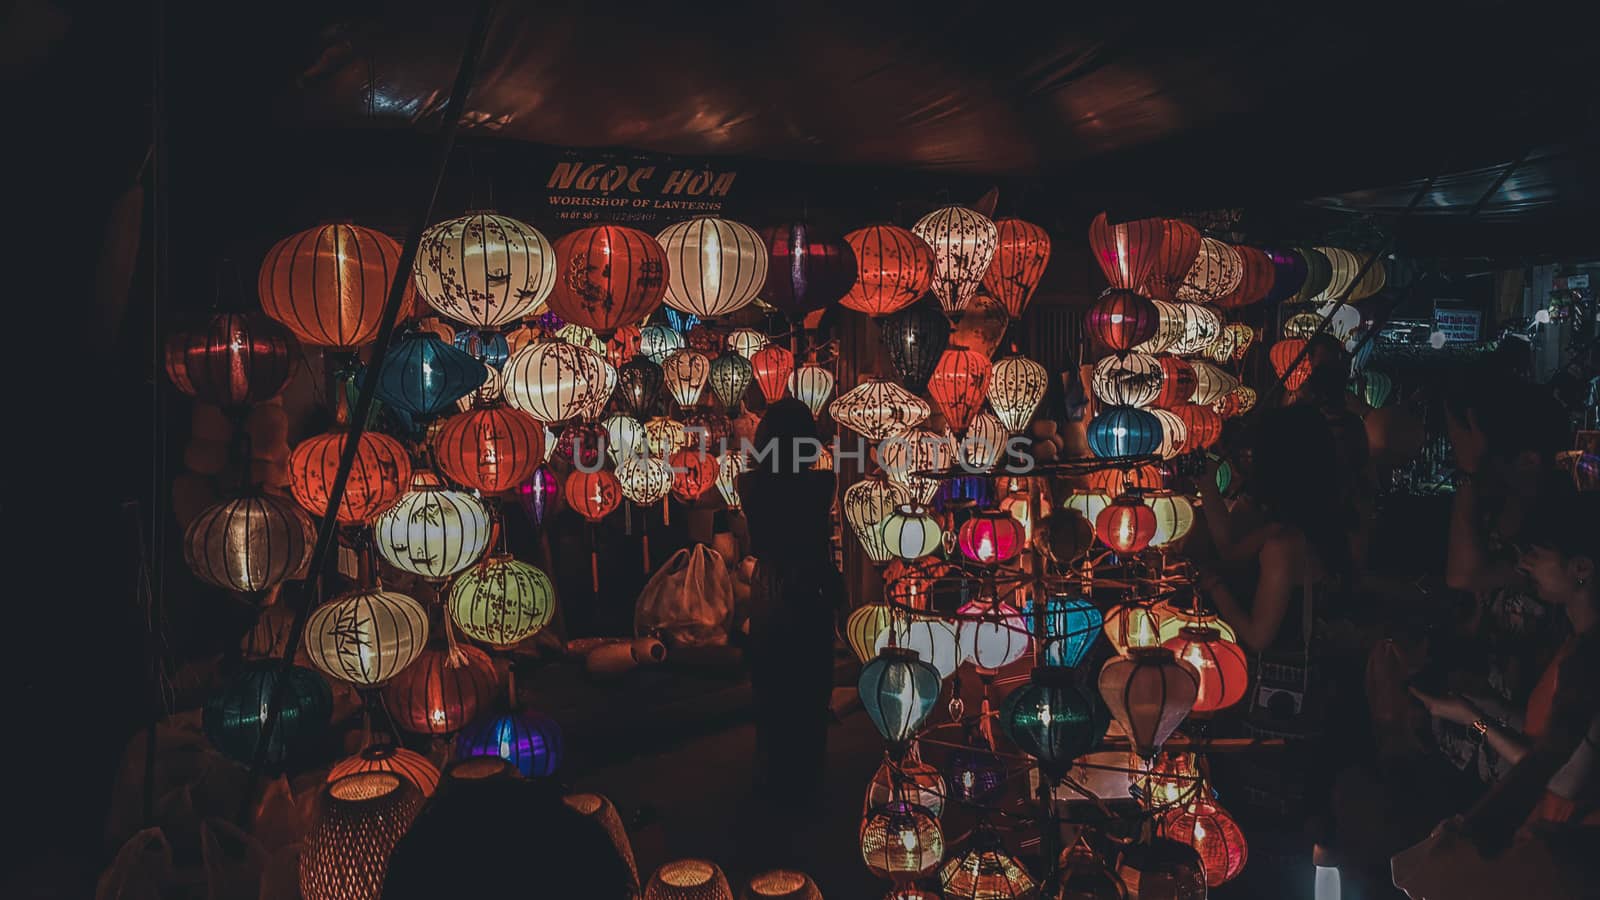 Beautiful traditional Hoi an Lanterns in the night market of Hoi an, Vietnam